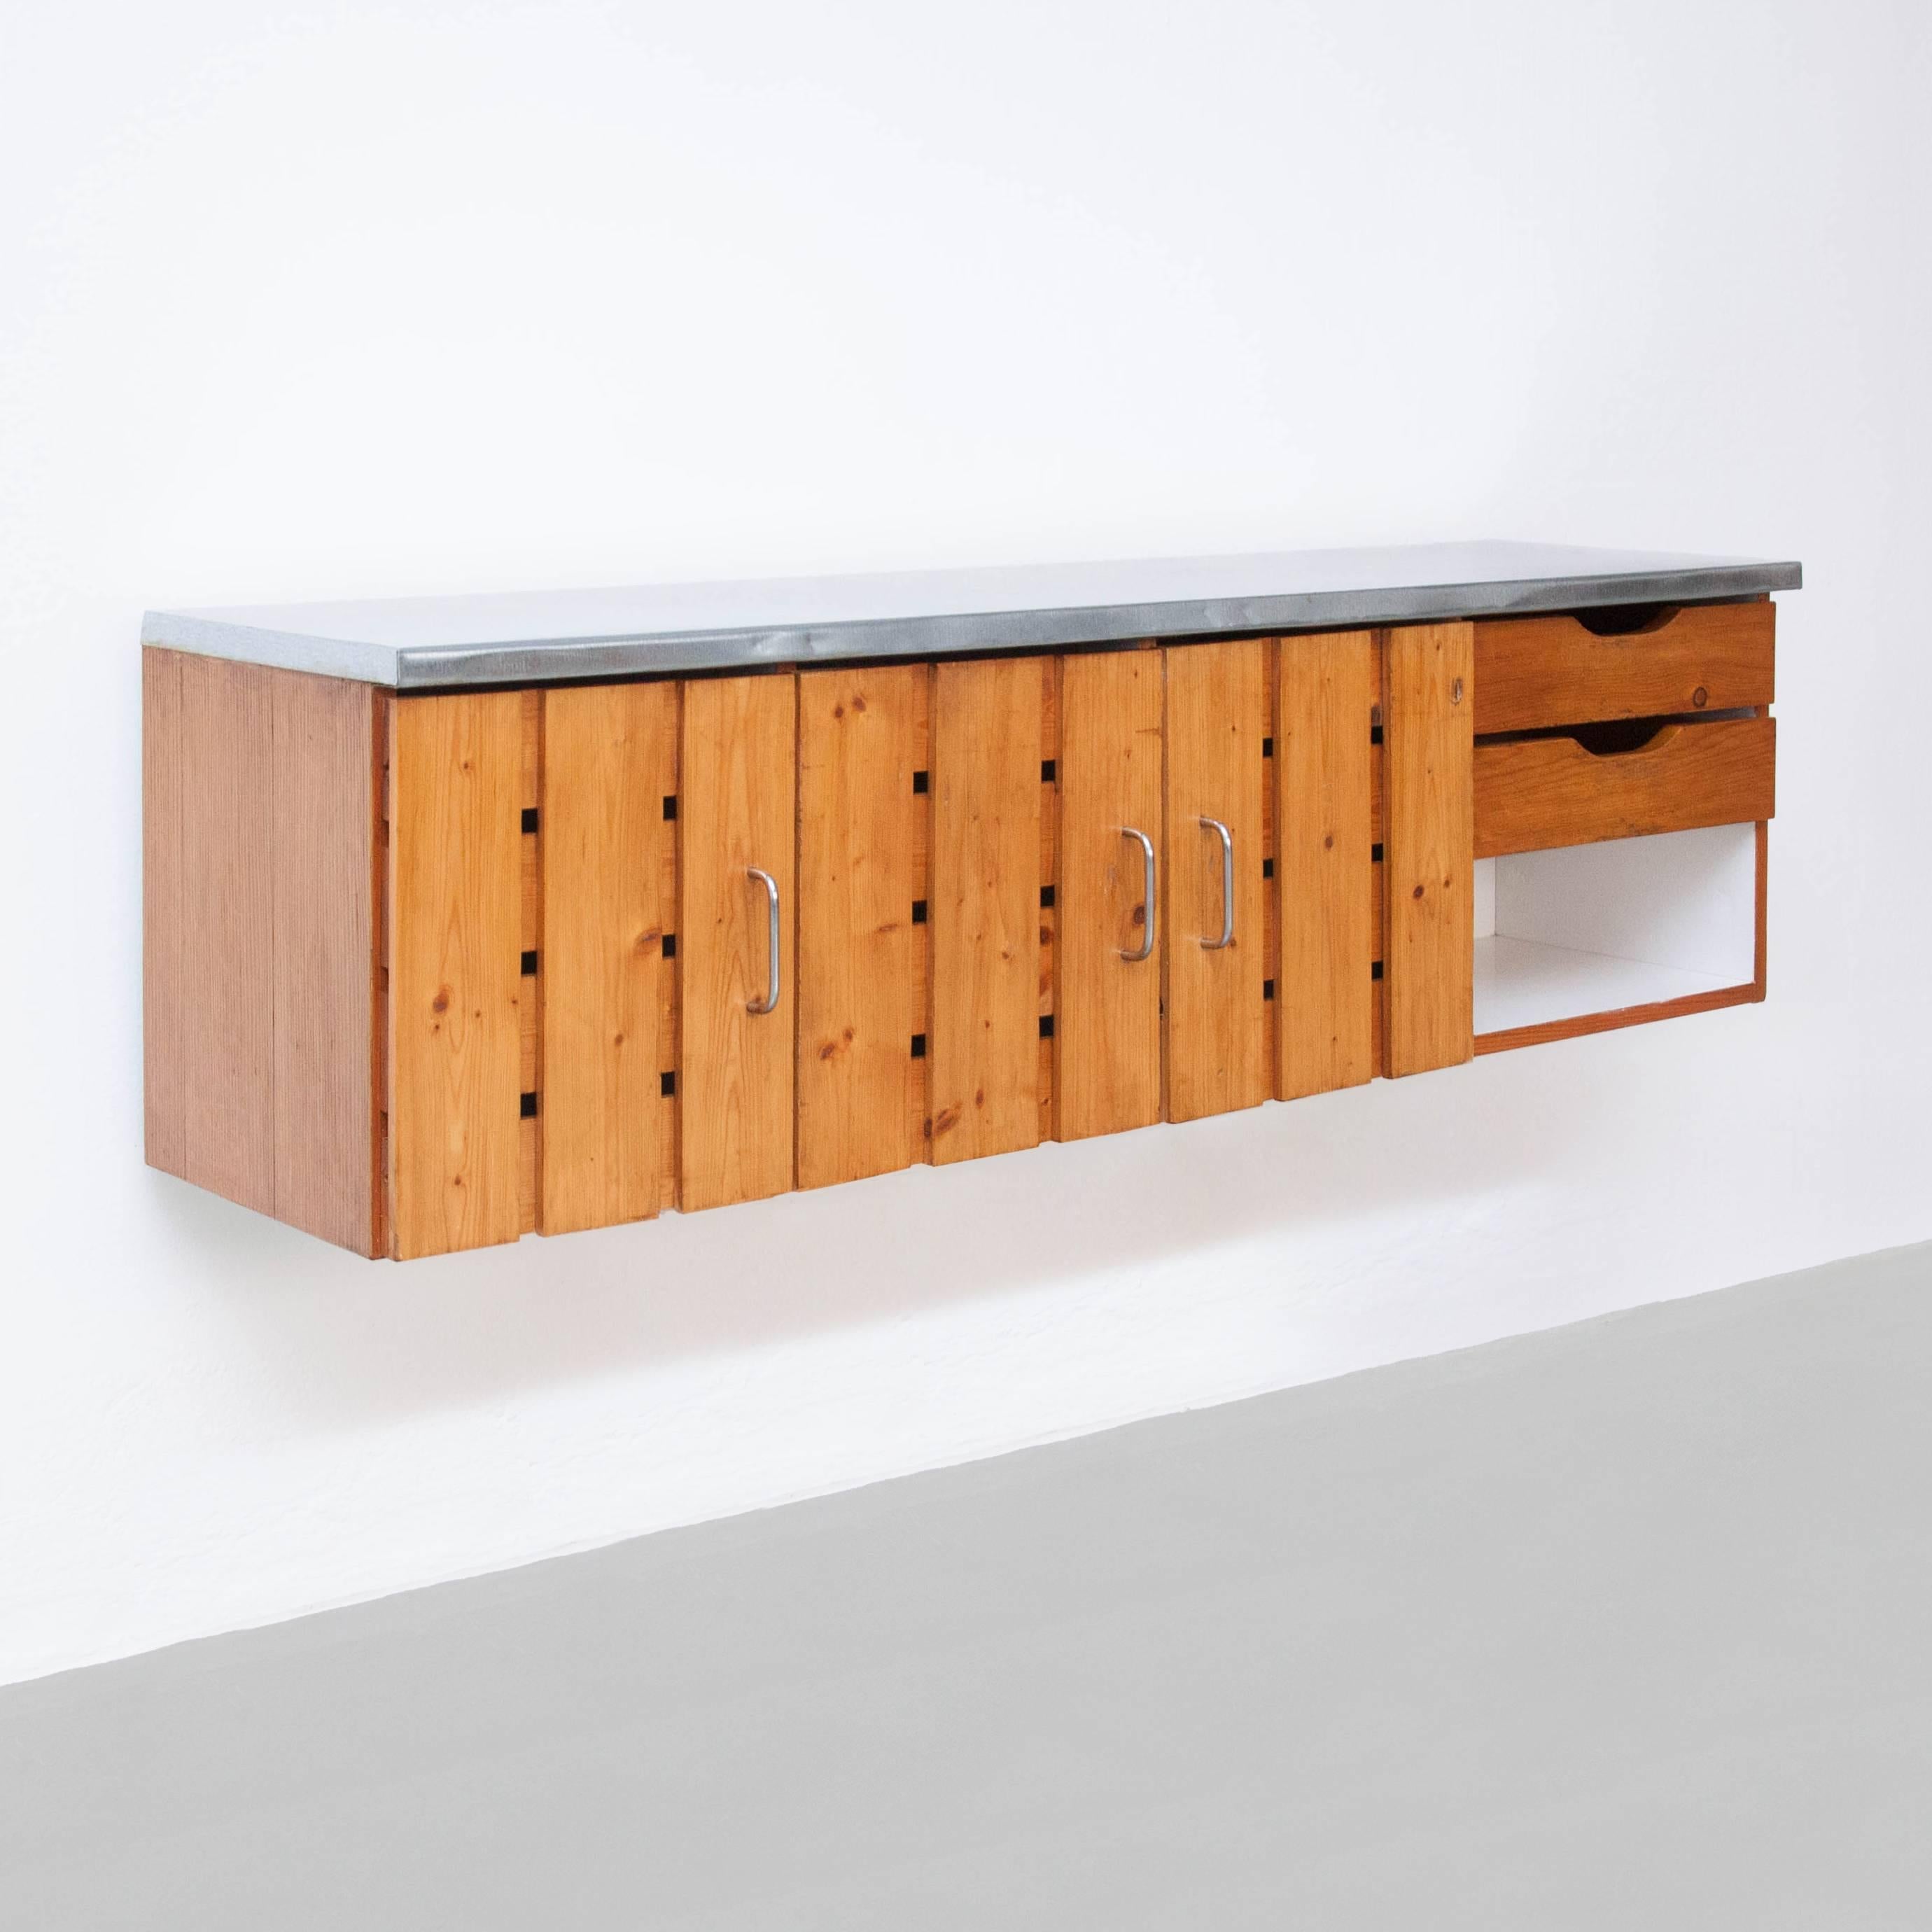 Sideboard designed by Charlotte Perriand for Les Arcs, circa 1960. 
Manufactured in France.
Pinewood and steel.

In good original condition, with minor wear consistent with age and use, preserving a beautiful patina with some scratches and